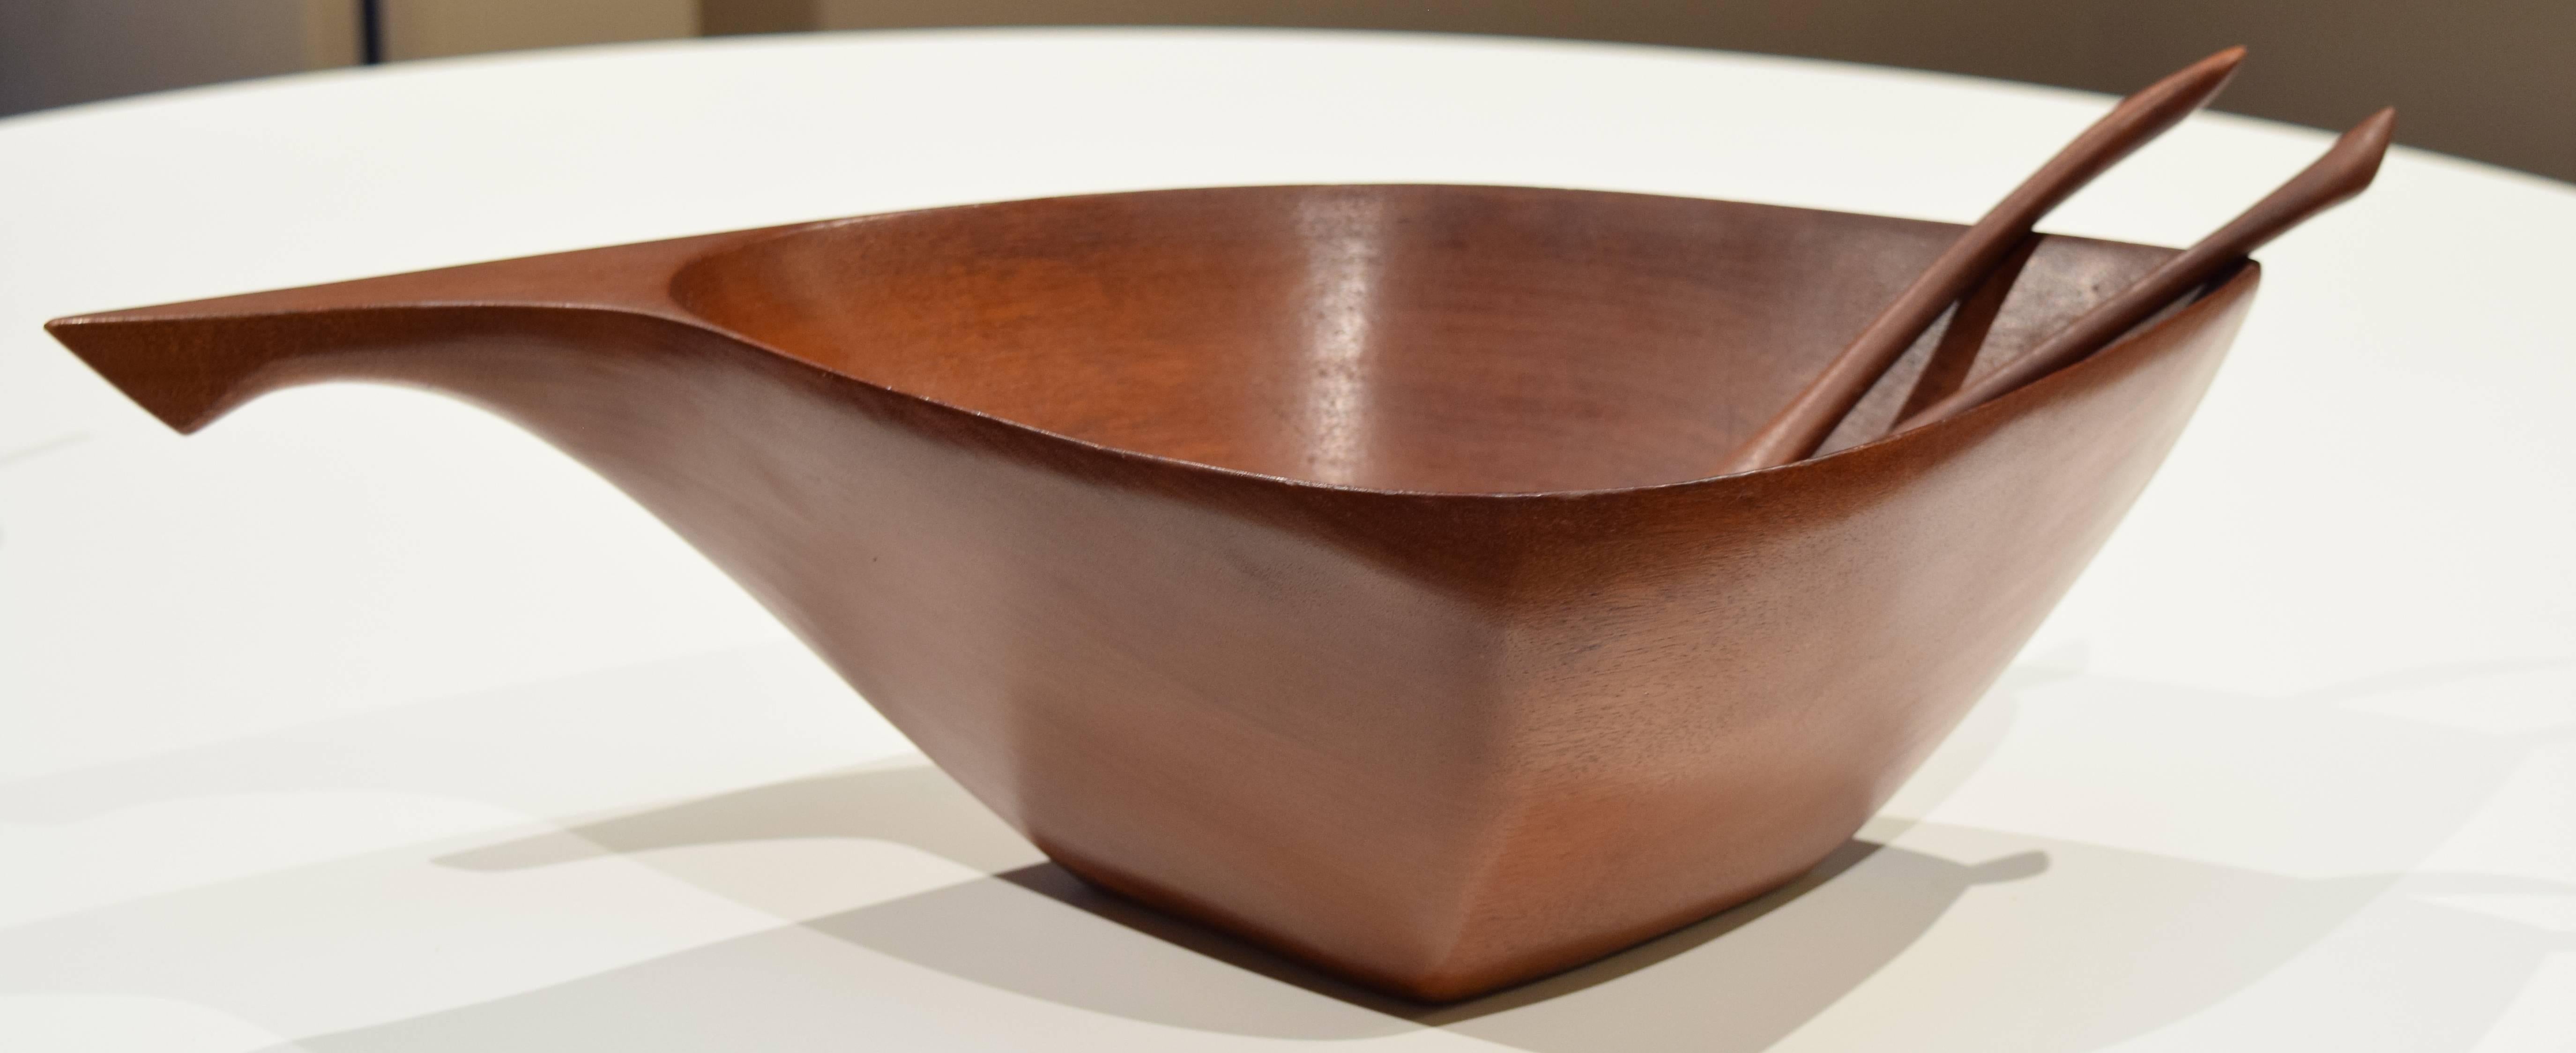 Sculptural bowl and serving utensils in solid mahogany. Made in Haiti by Arthur Umanoff and distributed by Raymor. Many other Umanoff items available including a 7-bottle wine rack, 12-bottle wine rack, two 67-bottle wine racks and two 39-bottle